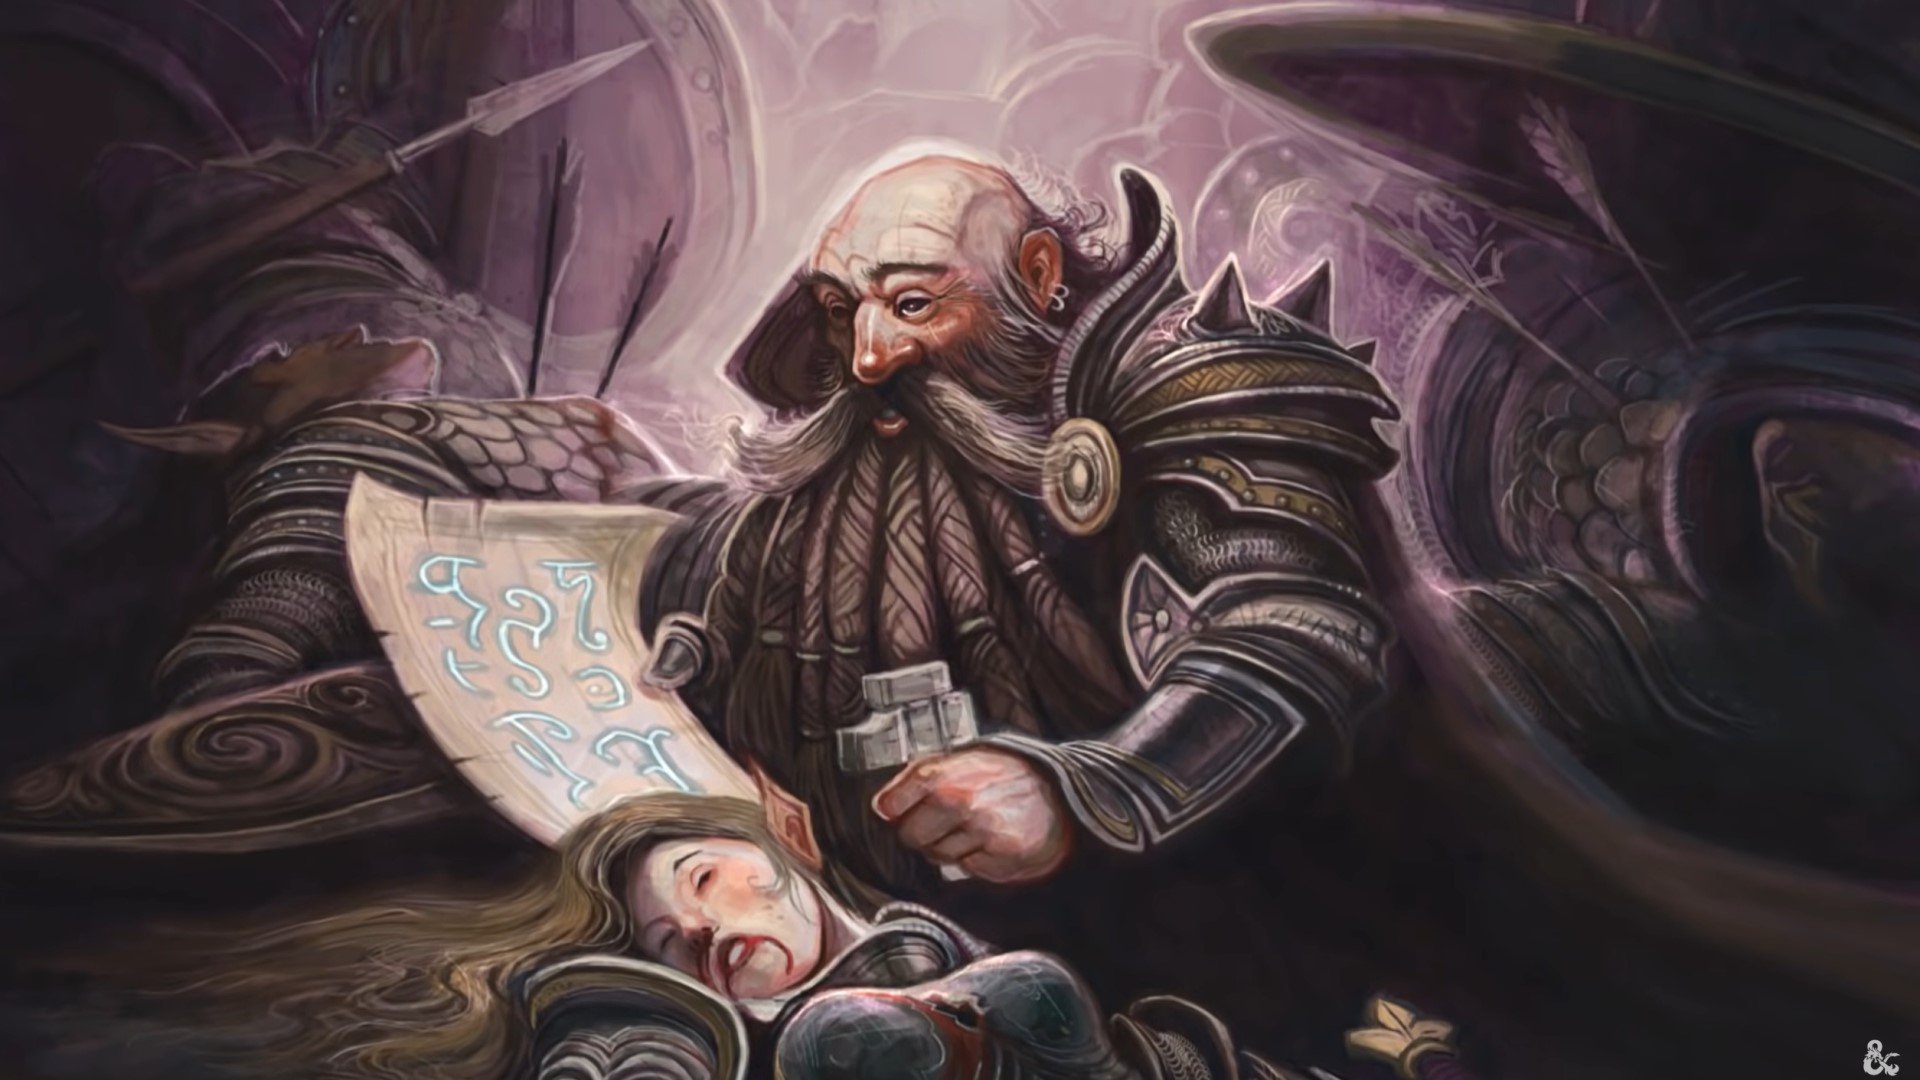 DnD Cleric 5e artwork showing a dwarf healing someone with a scroll (art by Wizards of the Coast)